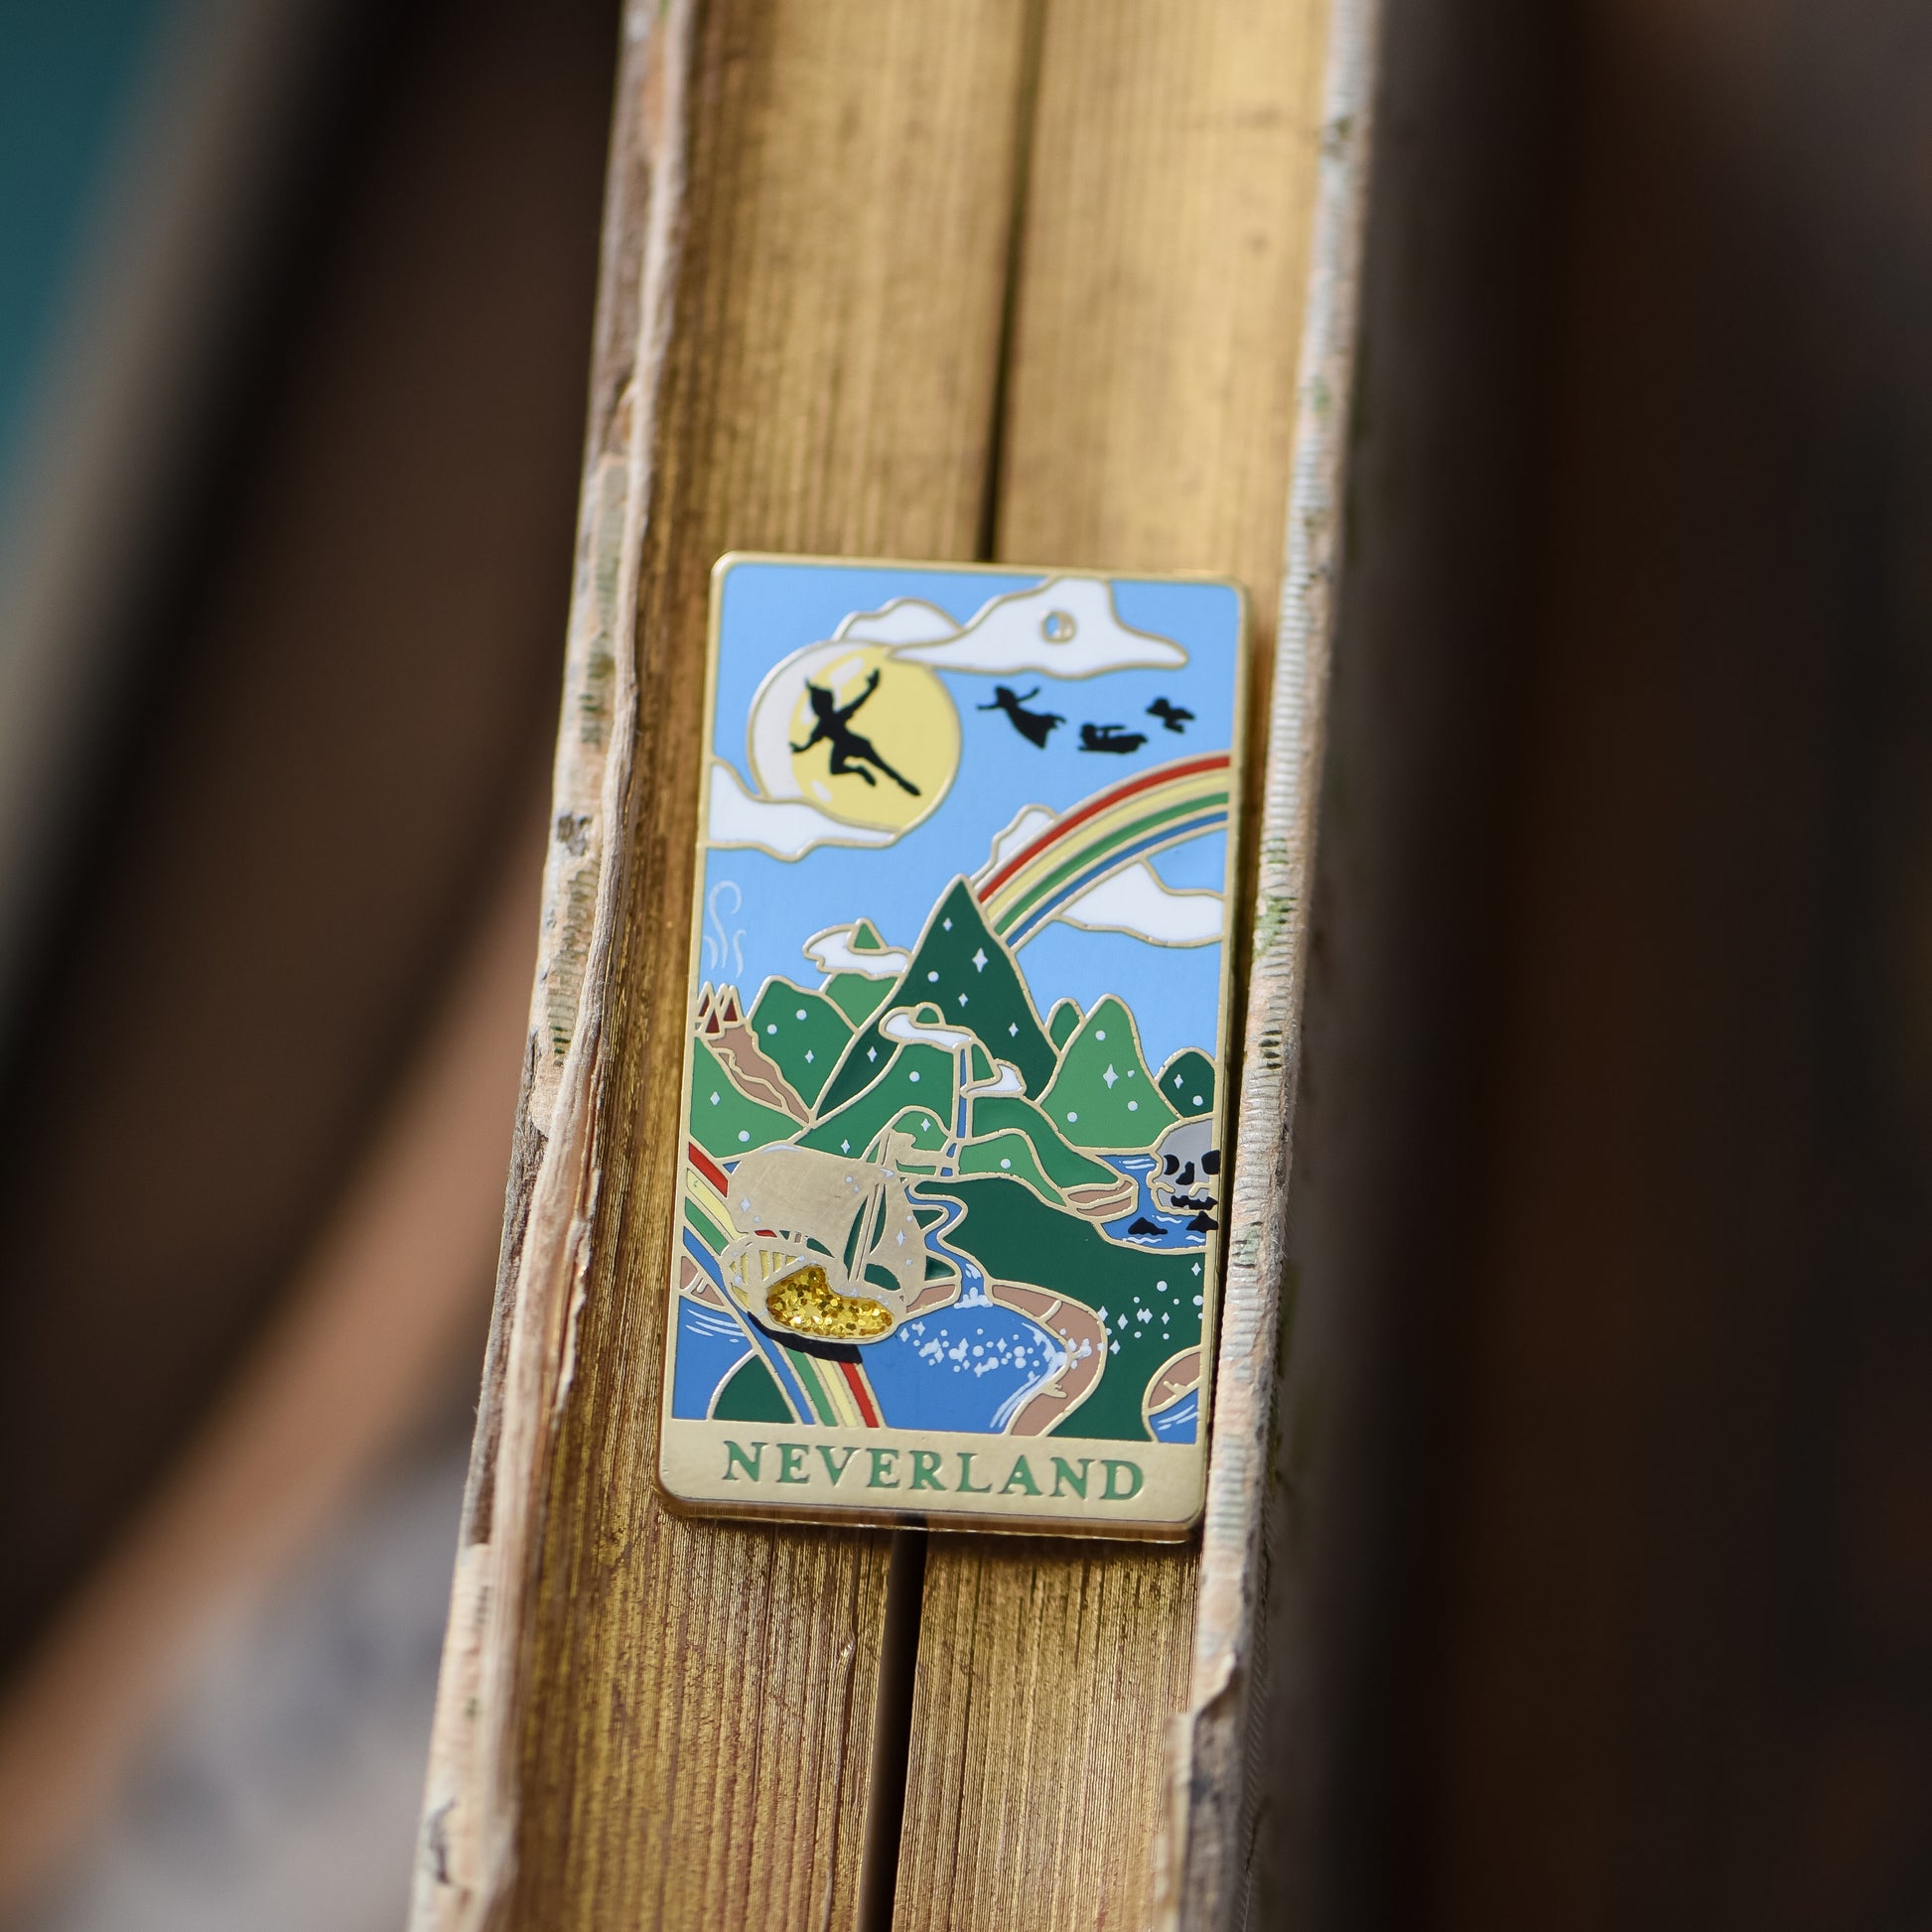 Gold Neverland landscape enamel pin with rainbow, moon, peter pan silhouette, and fairy ship details on an open book